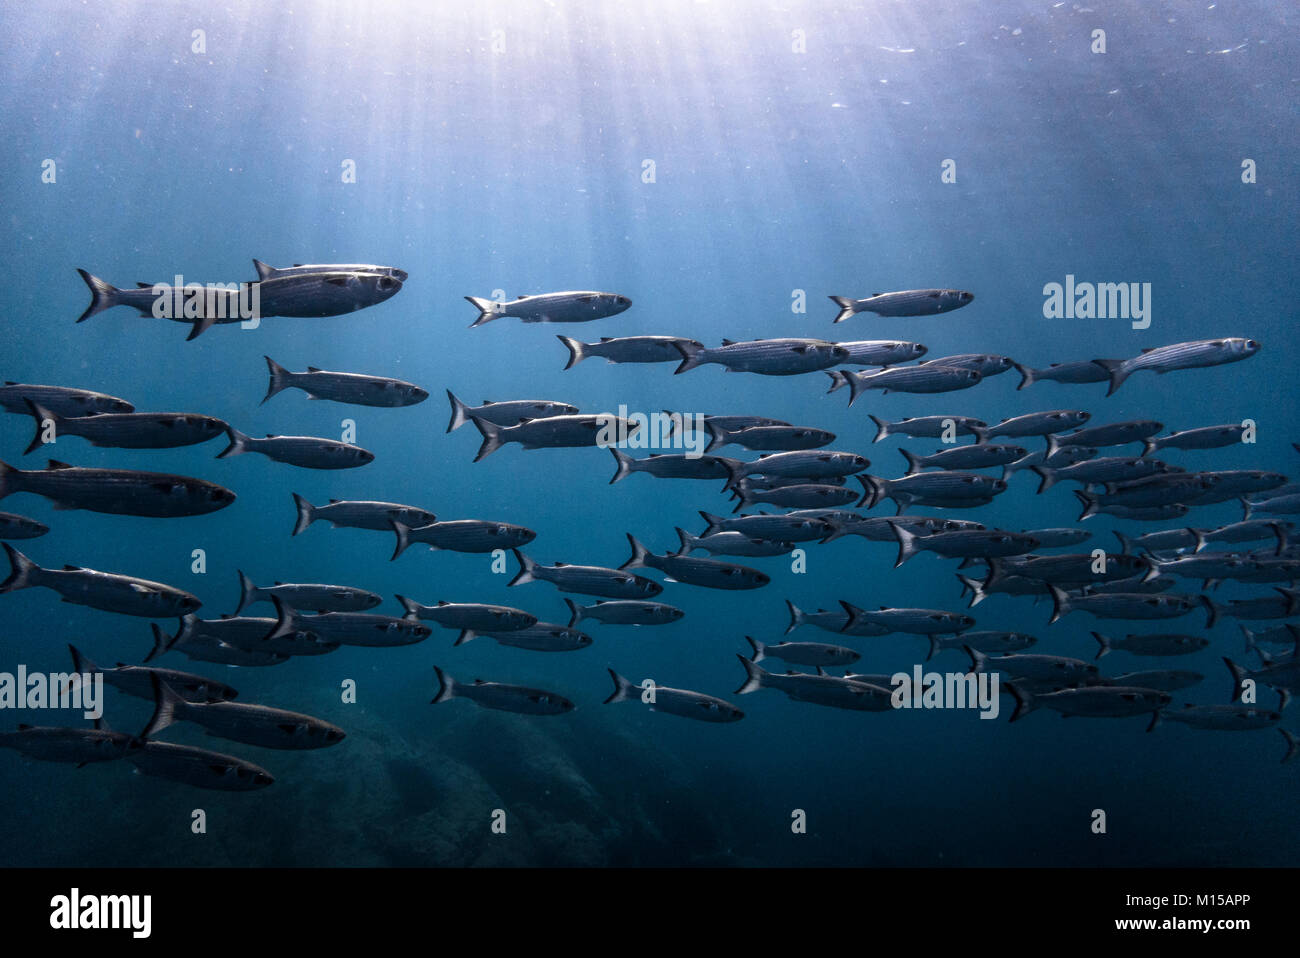 School of Mullet photographed in SE Brazil's island of Ilhabela. Stock Photo